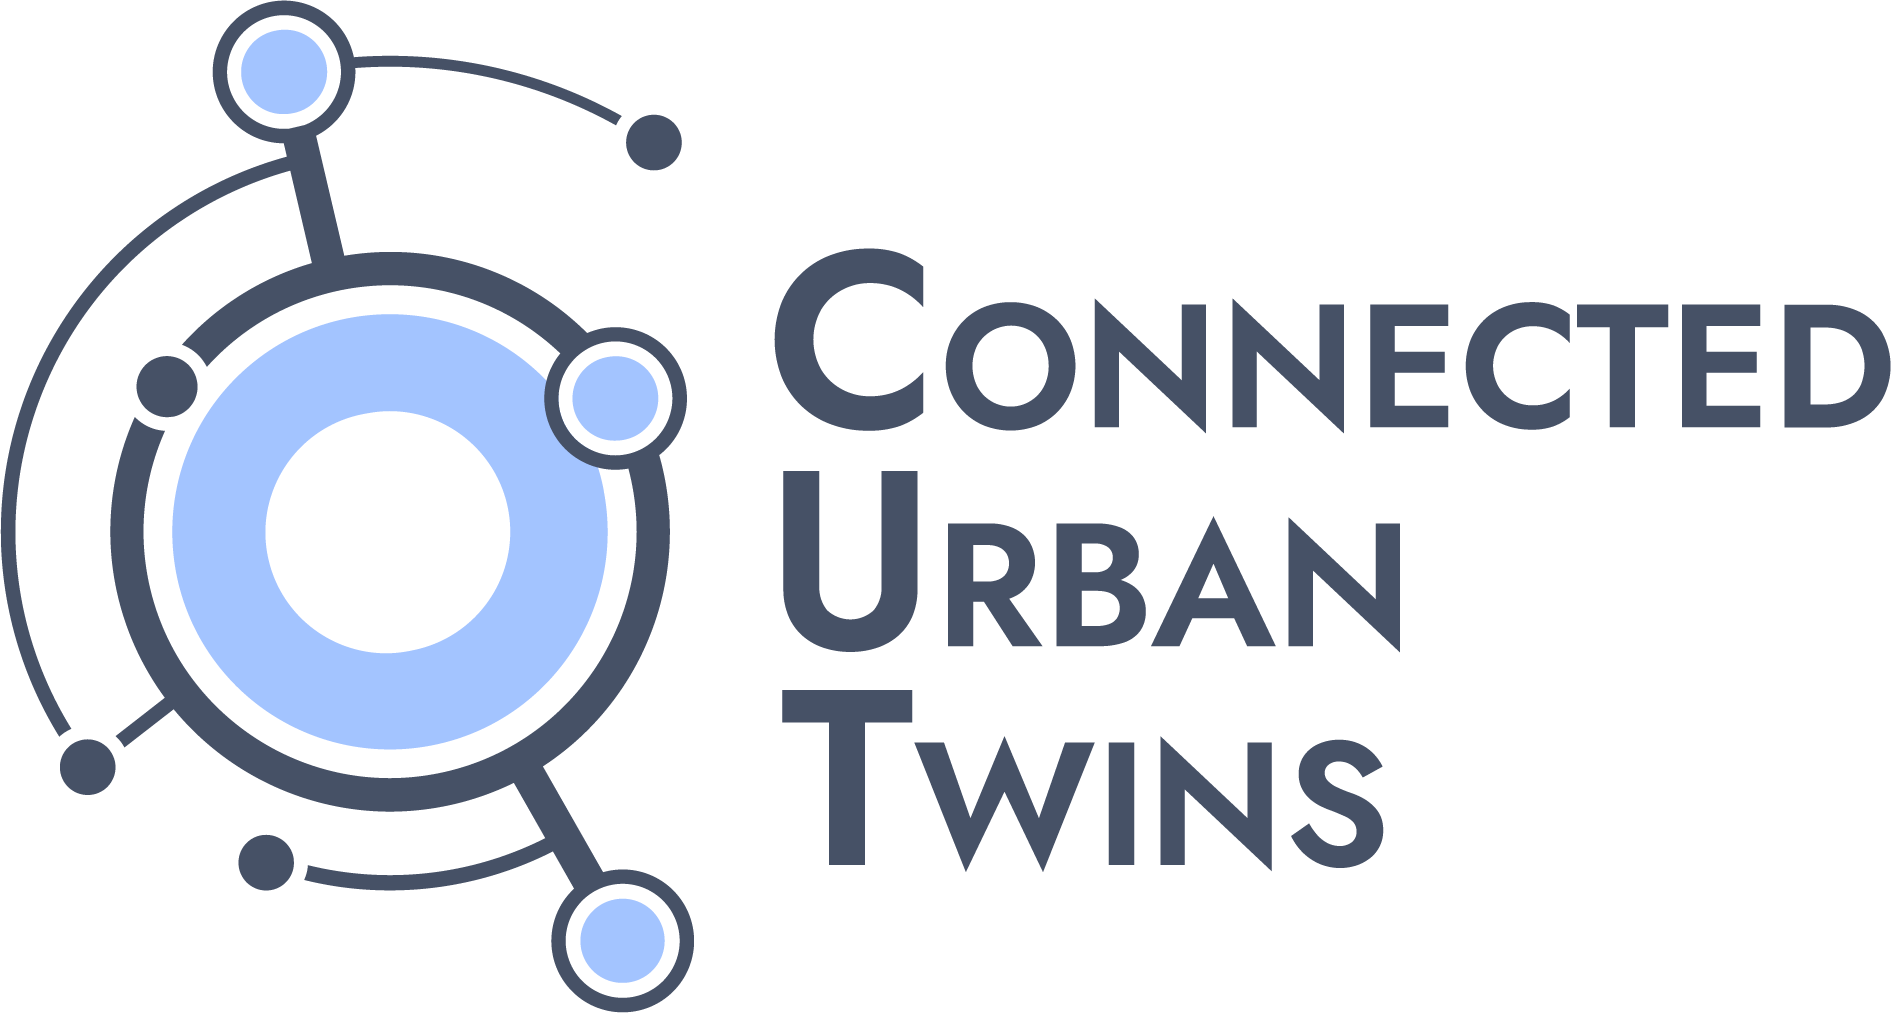 Connected Urban Twins